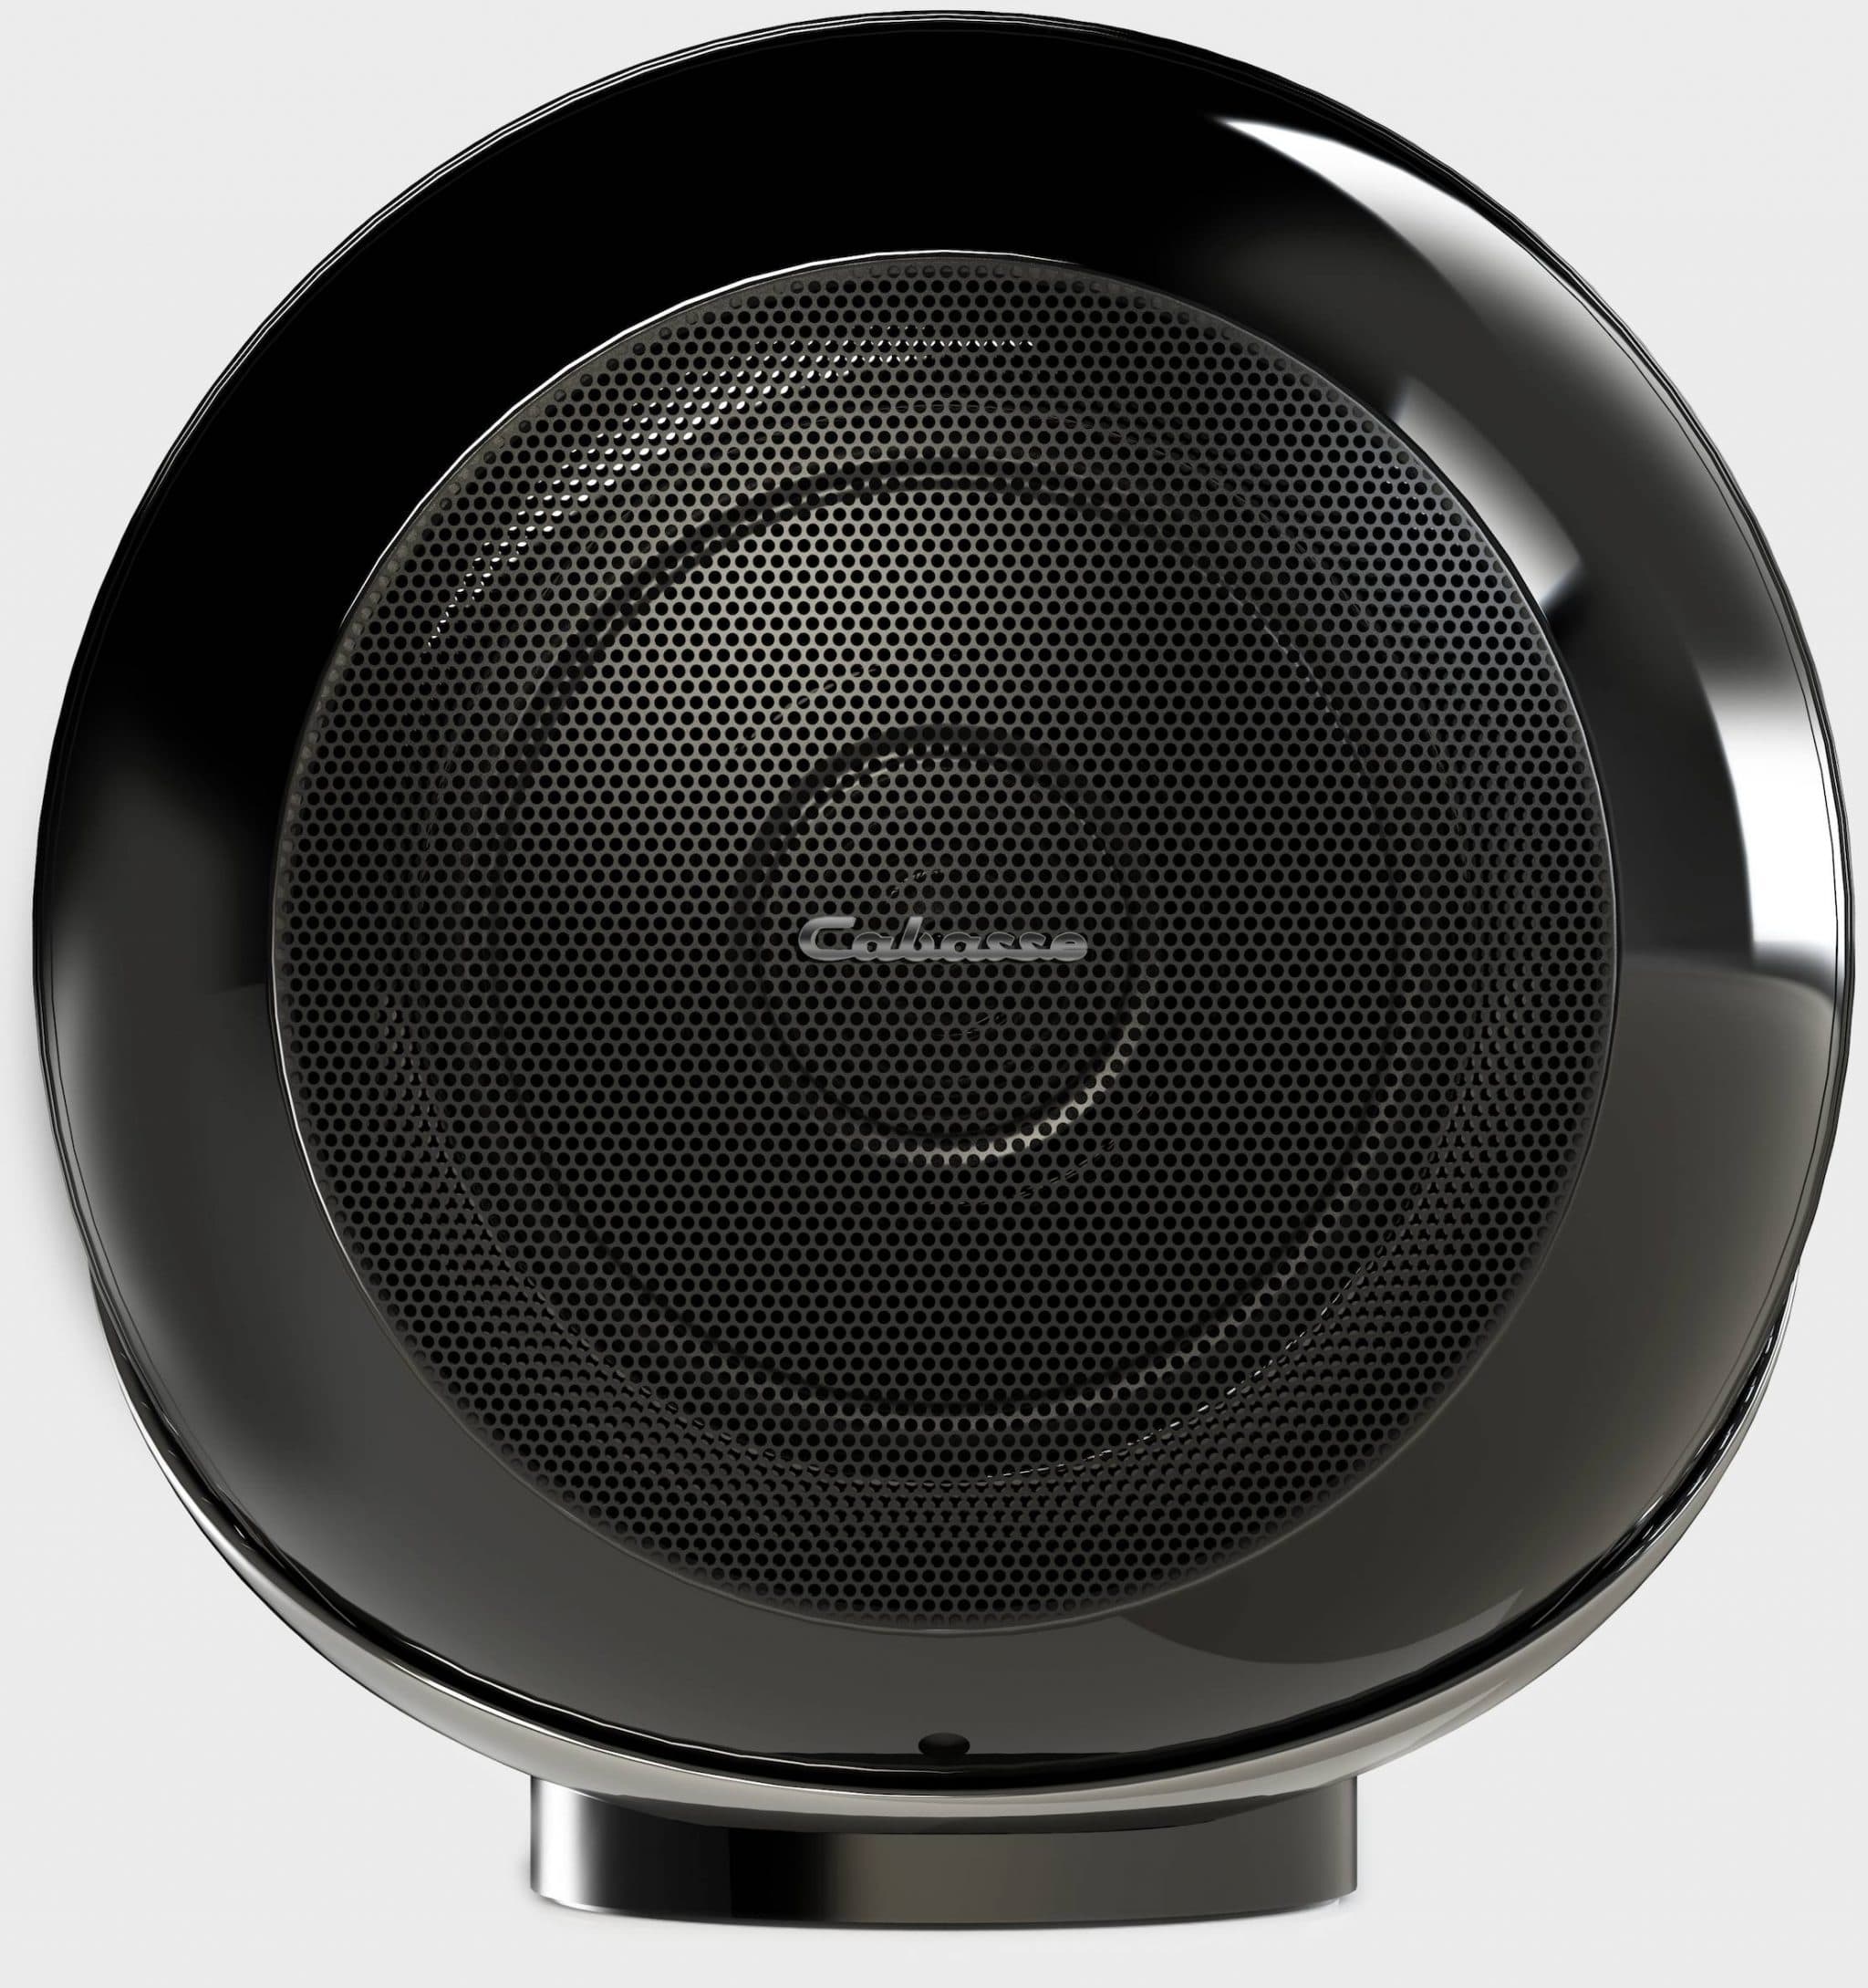 Cabasse The Pearl Akoya Speaker review: Excellence in attack - DXOMARK